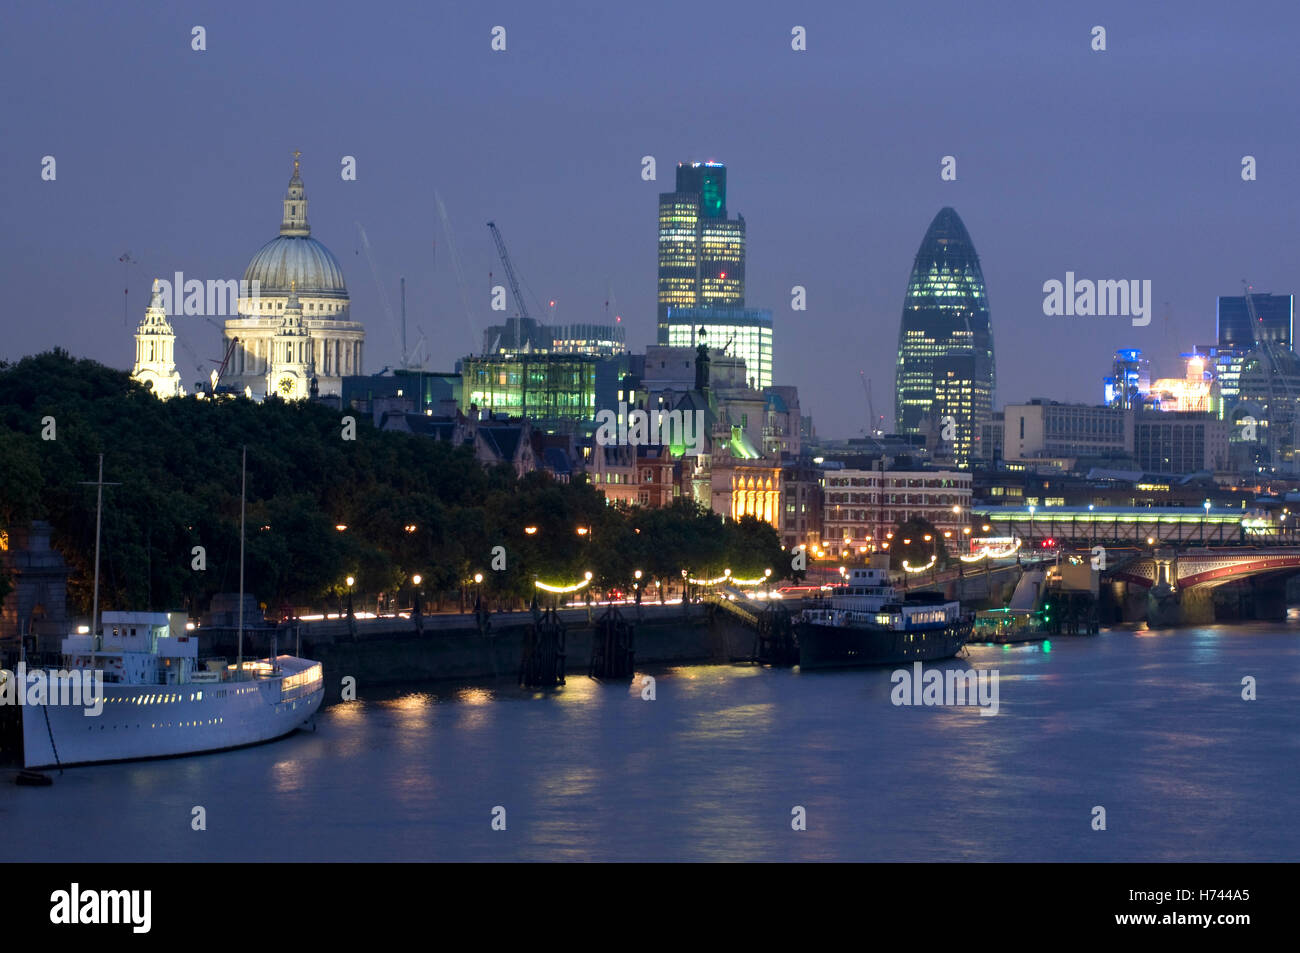 City of London skyline at night, St. Paul's Cathedral, Swiss Re Tower, London, England, United Kingdom, Europe Stock Photo